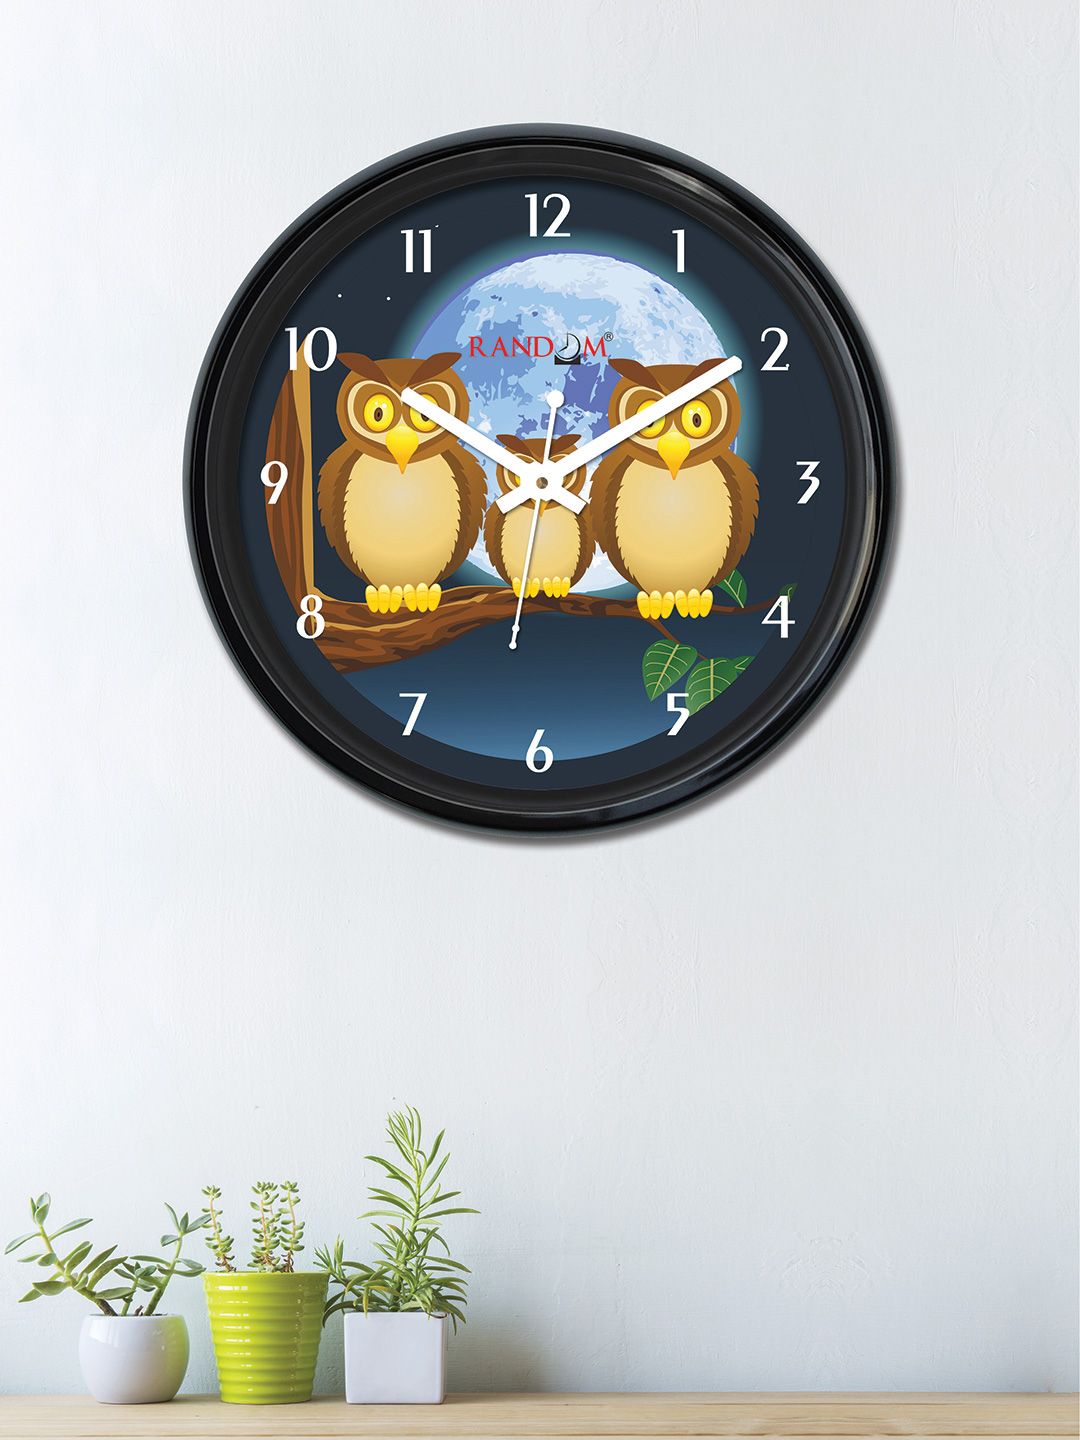 RANDOM Navy Blue & Brown Dial 30 cm x 30 cm Round Printed Analogue Wall Clock Price in India